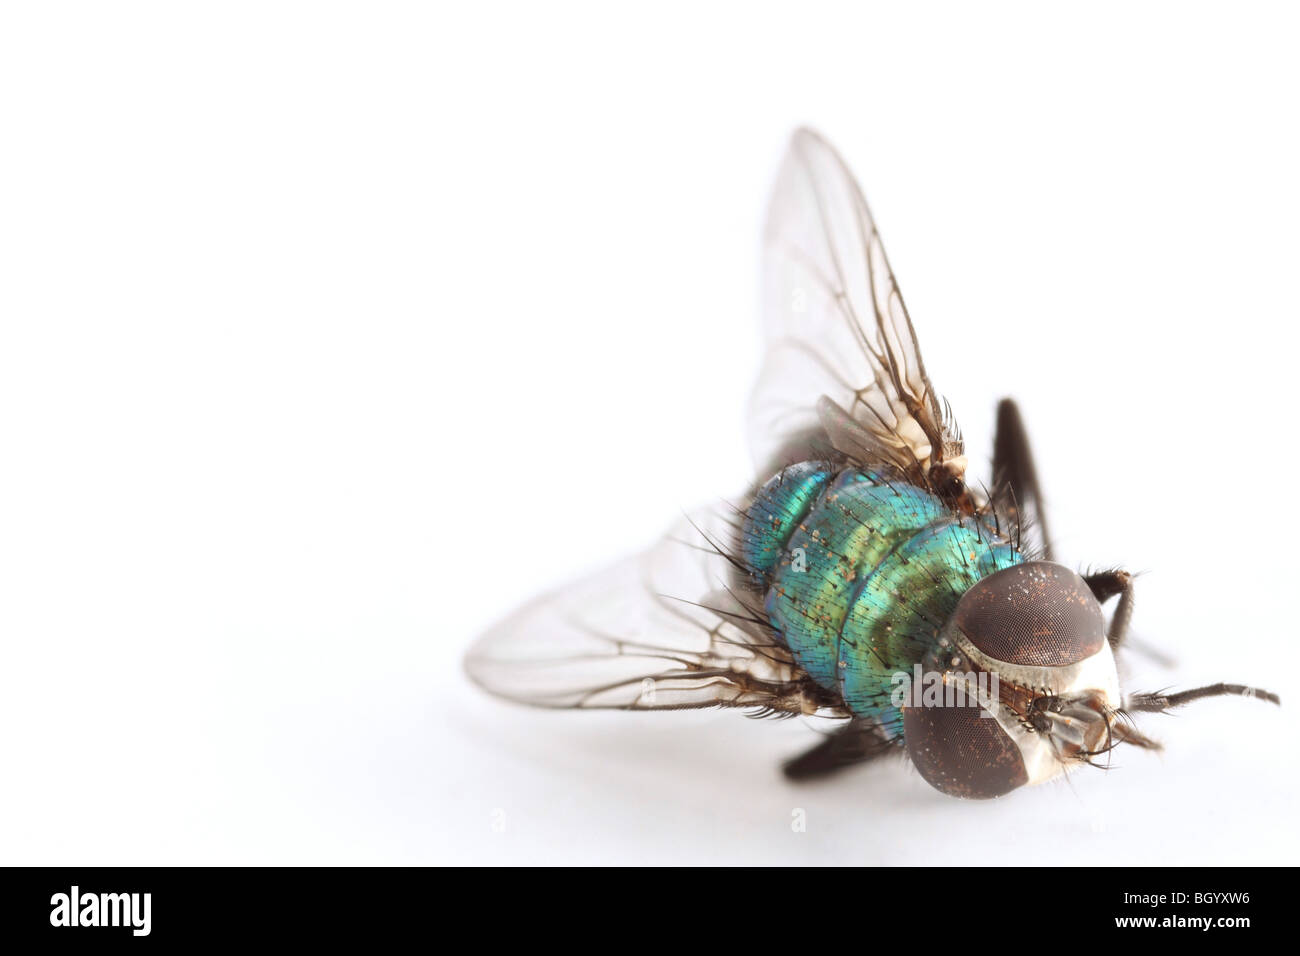 Dead blow fly Stock Photo